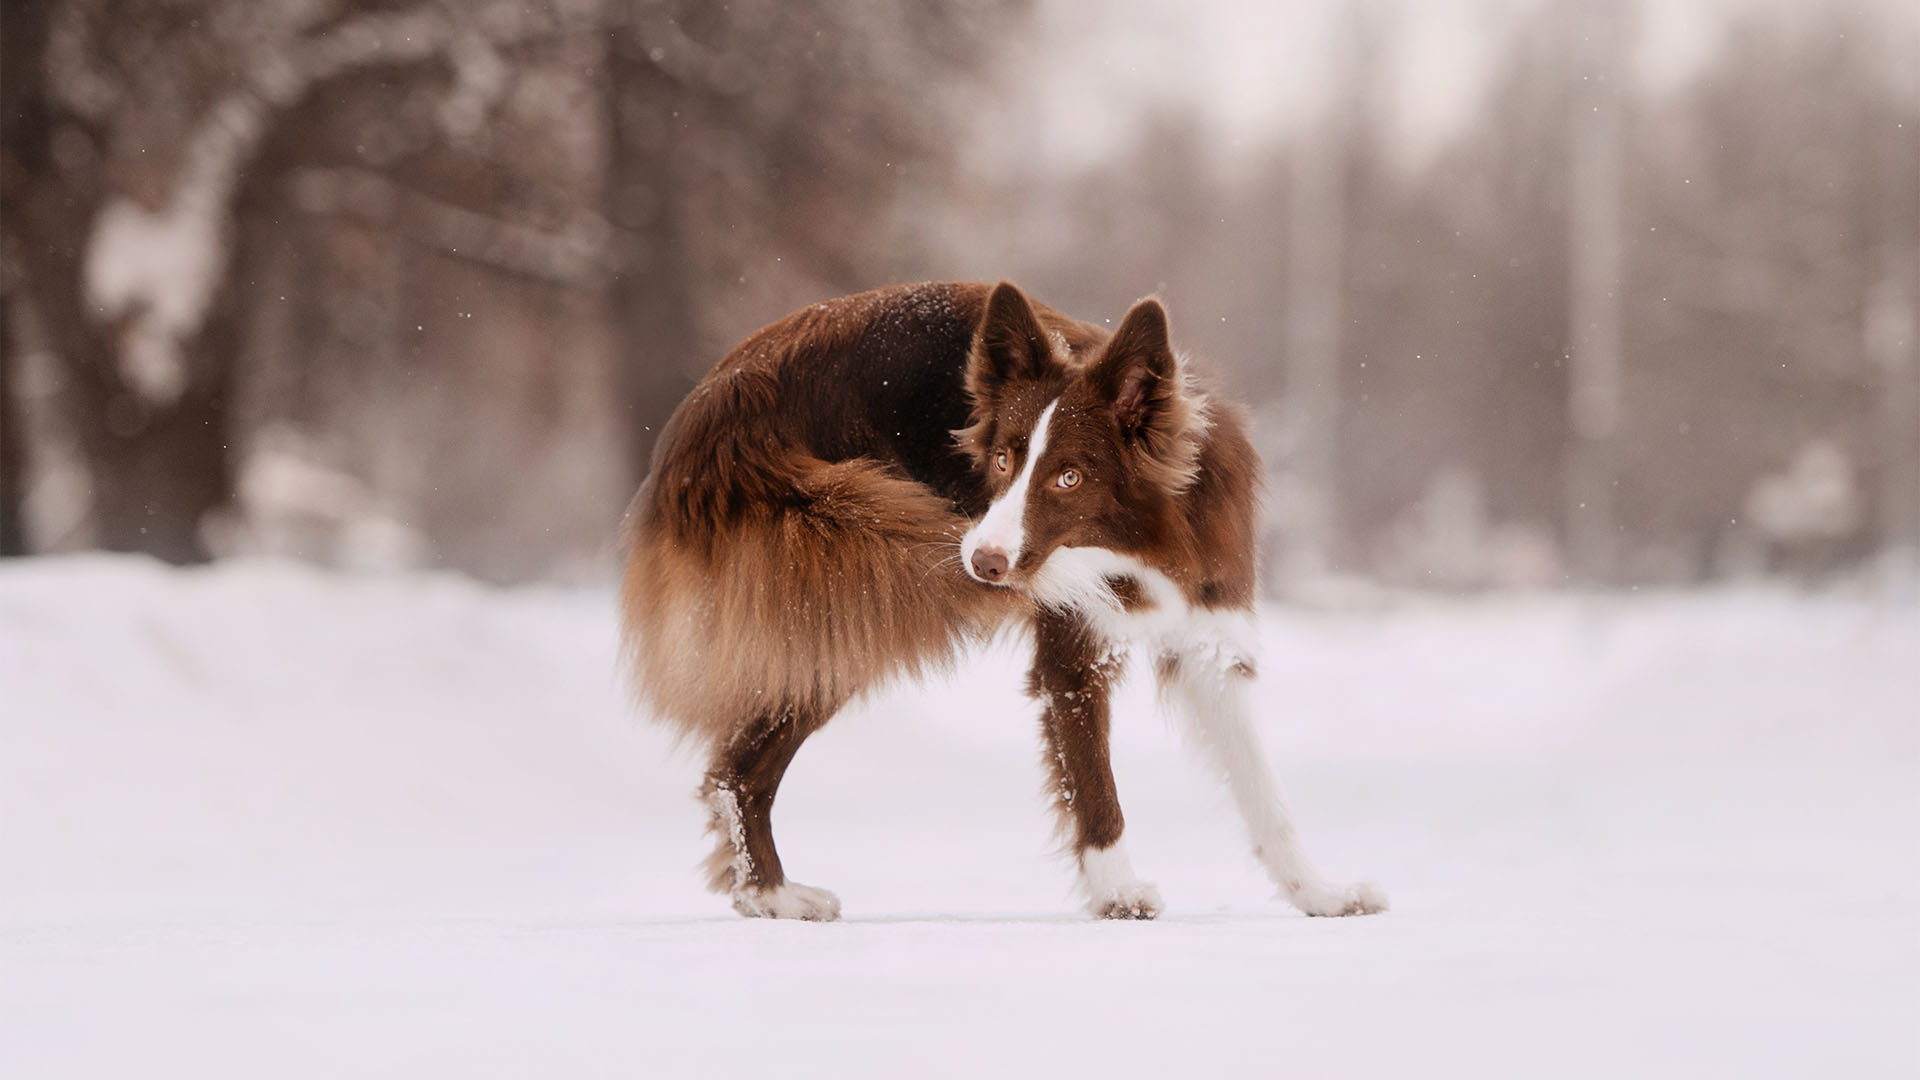 Border collie dog catching his own tail outdoors in winter.